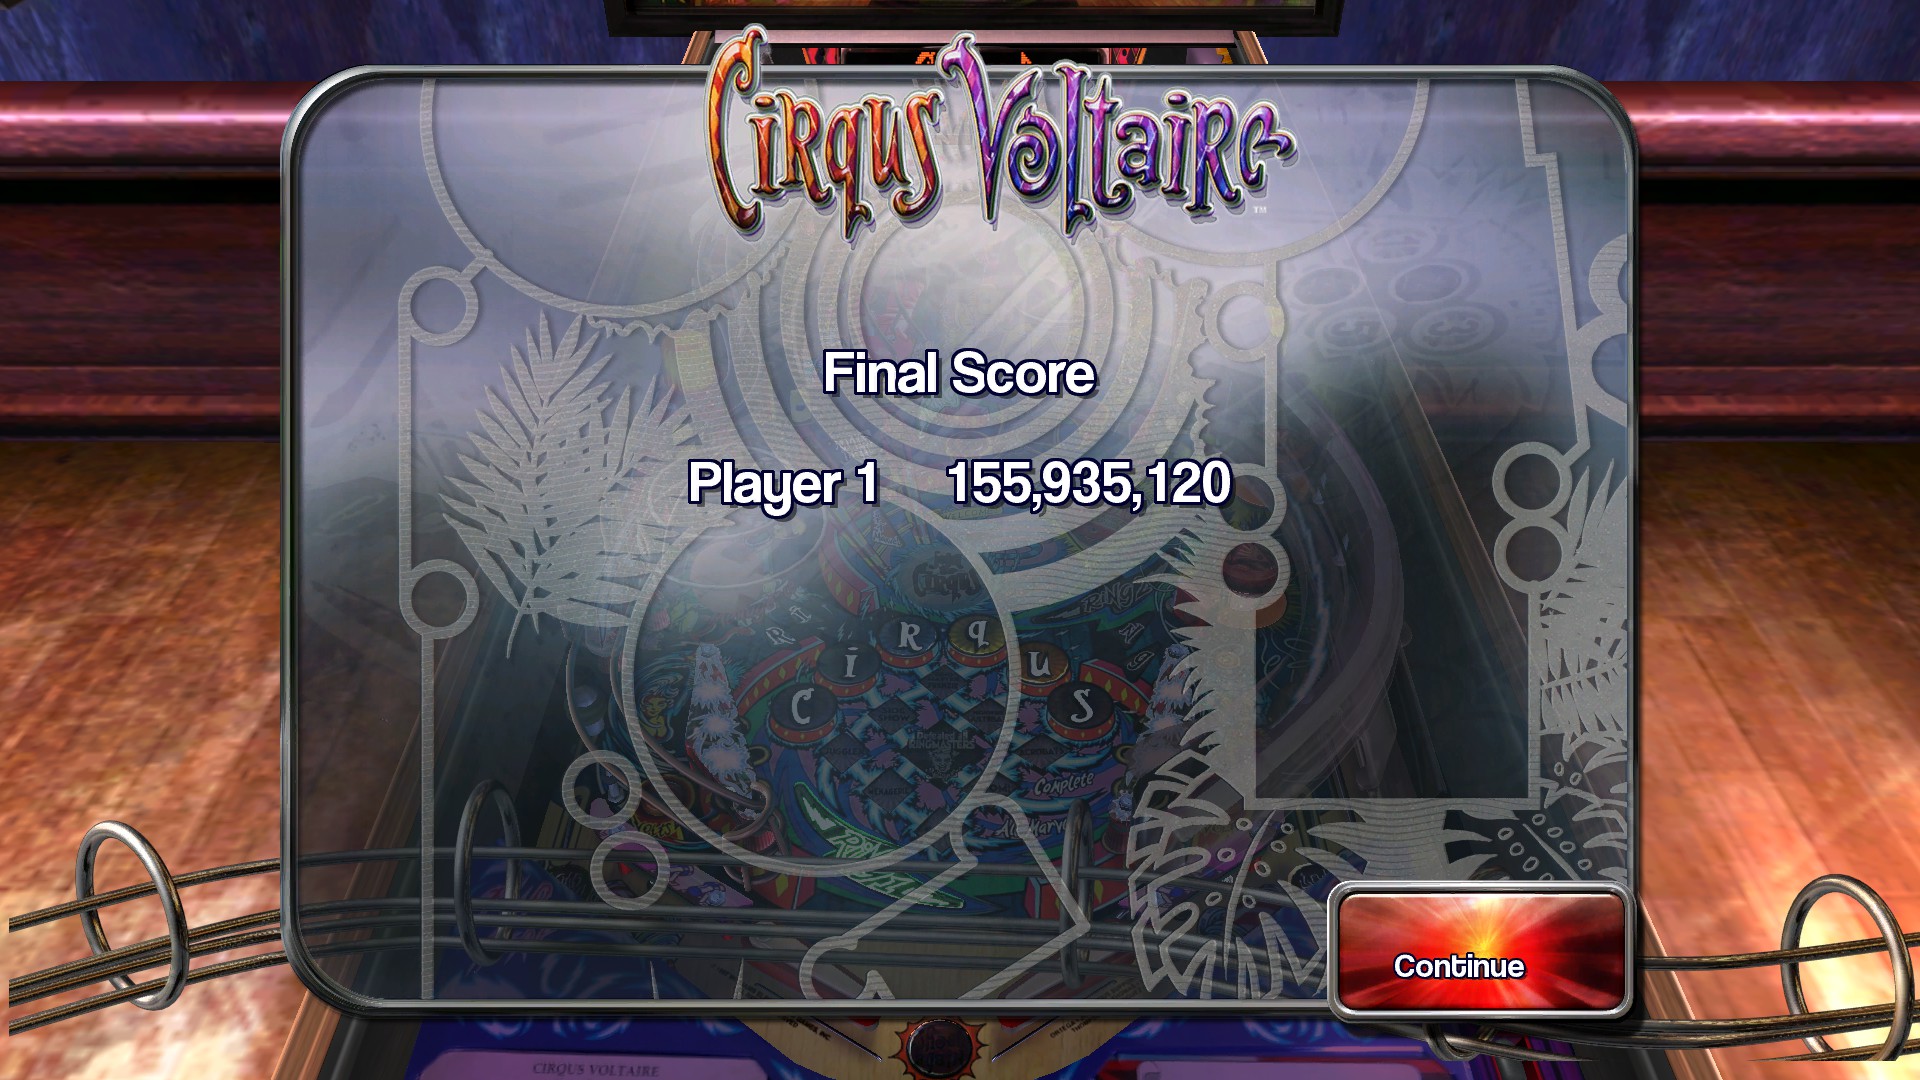 TheTrickster: Pinball Arcade: Circus Voltaire (PC) 155,935,120 points on 2015-11-27 19:35:36